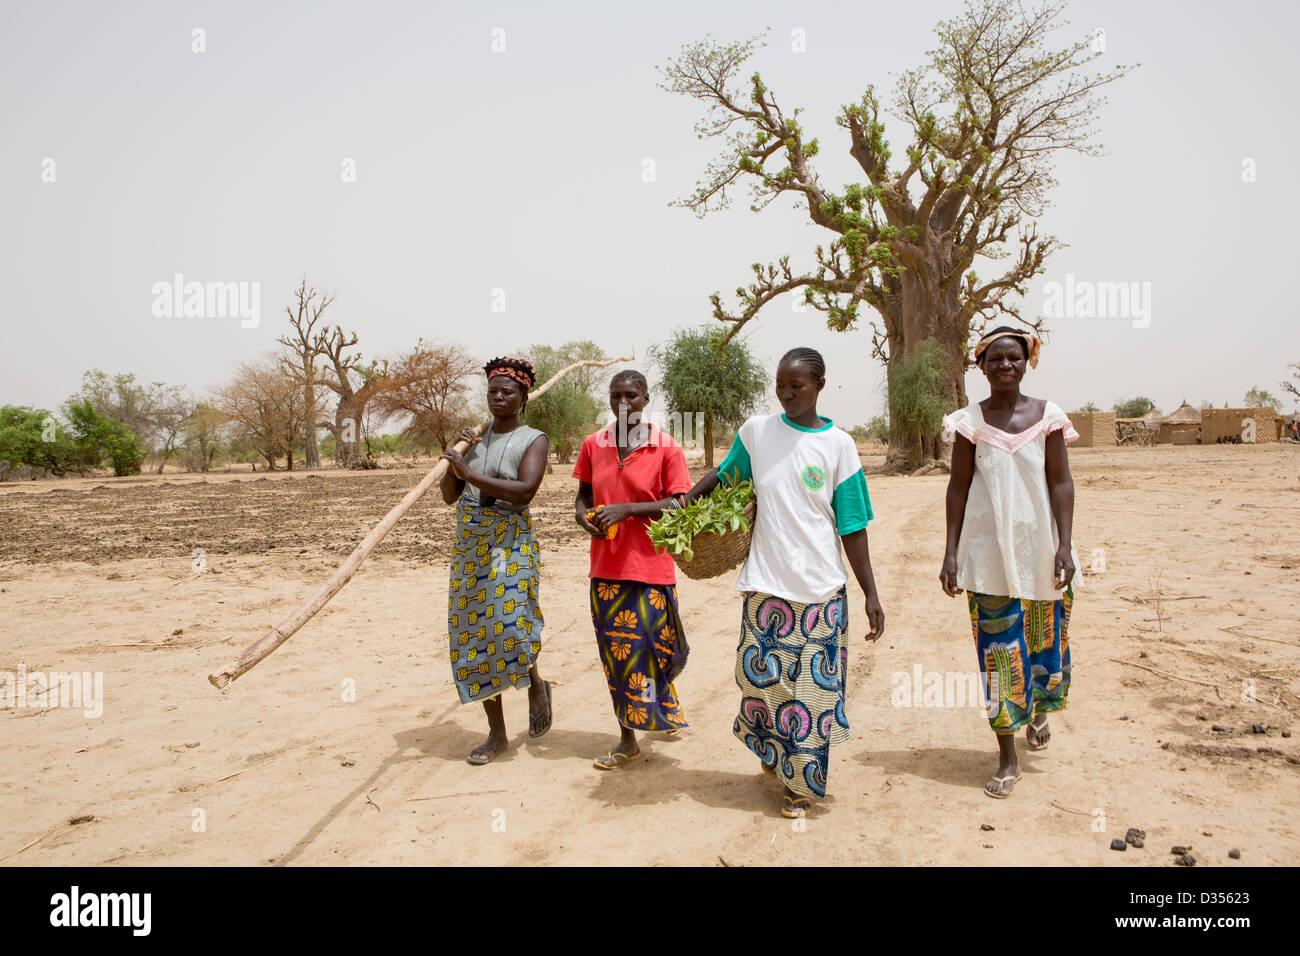 Barsalogho, Burkina Faso, May 2012: Village women collect baobab leaves in  to suppliment their diet in the dry season. Stock Photo